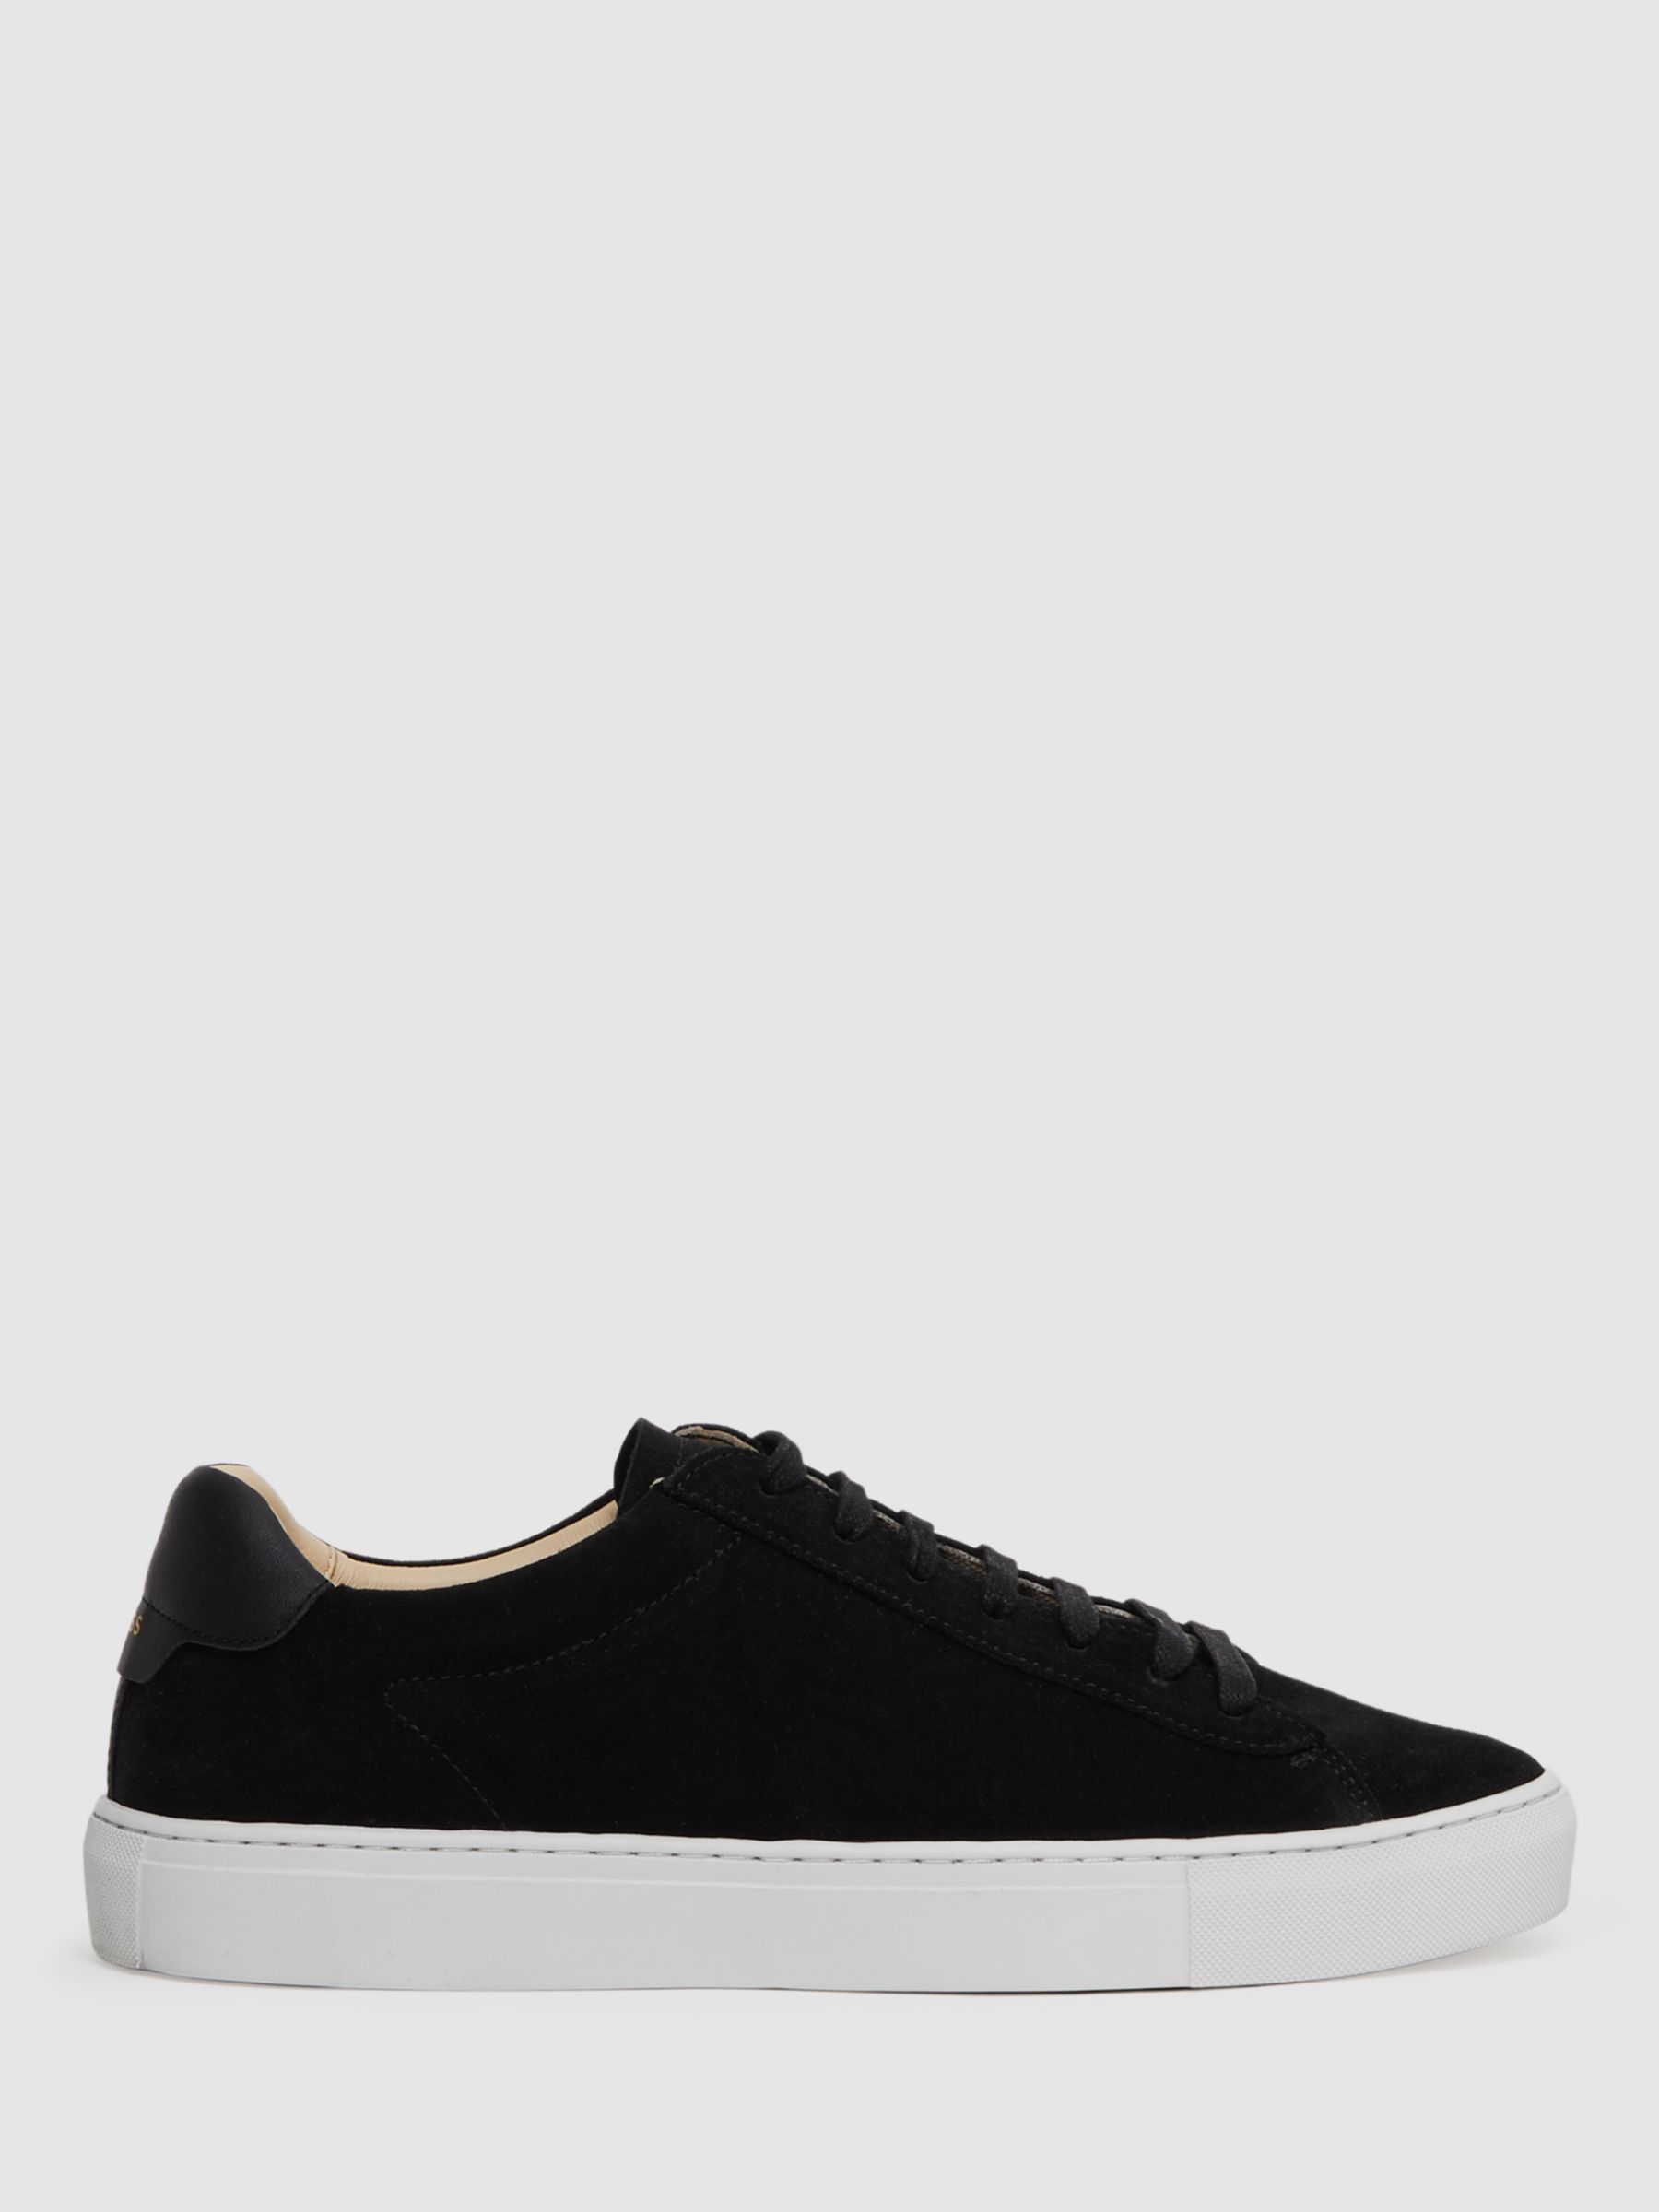 Reiss Finley Suede Lace Up Trainers, Black at John Lewis & Partners